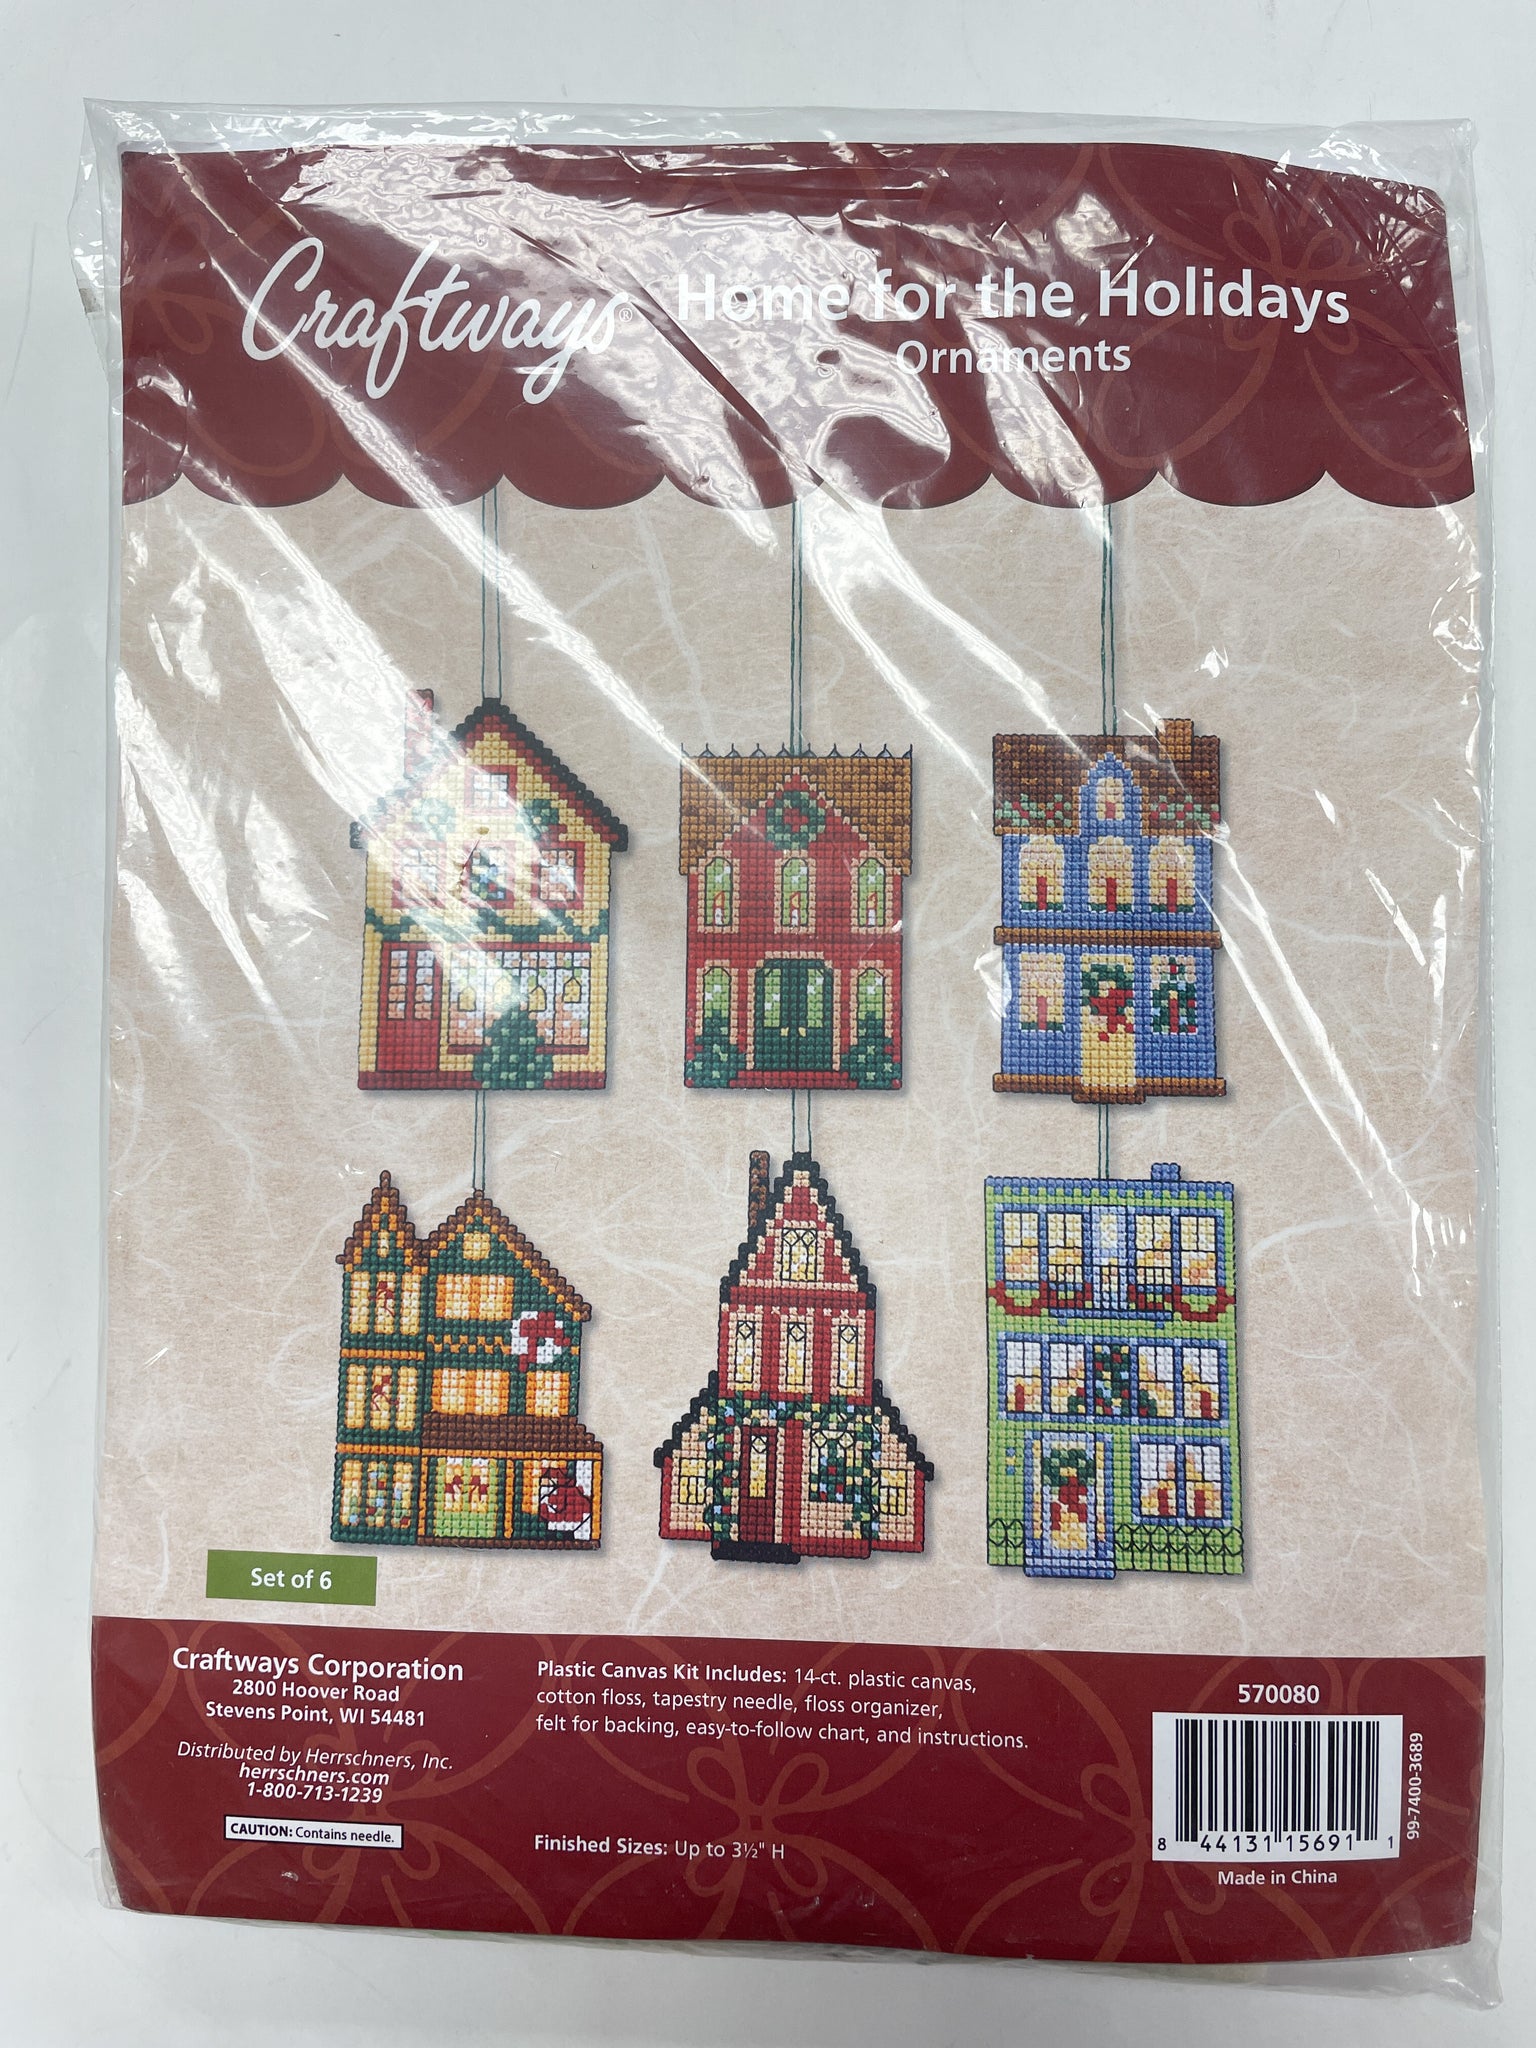 2015 Plastic Canvas Cross Stitch Kit - "Home for the Holidays" Ornaments